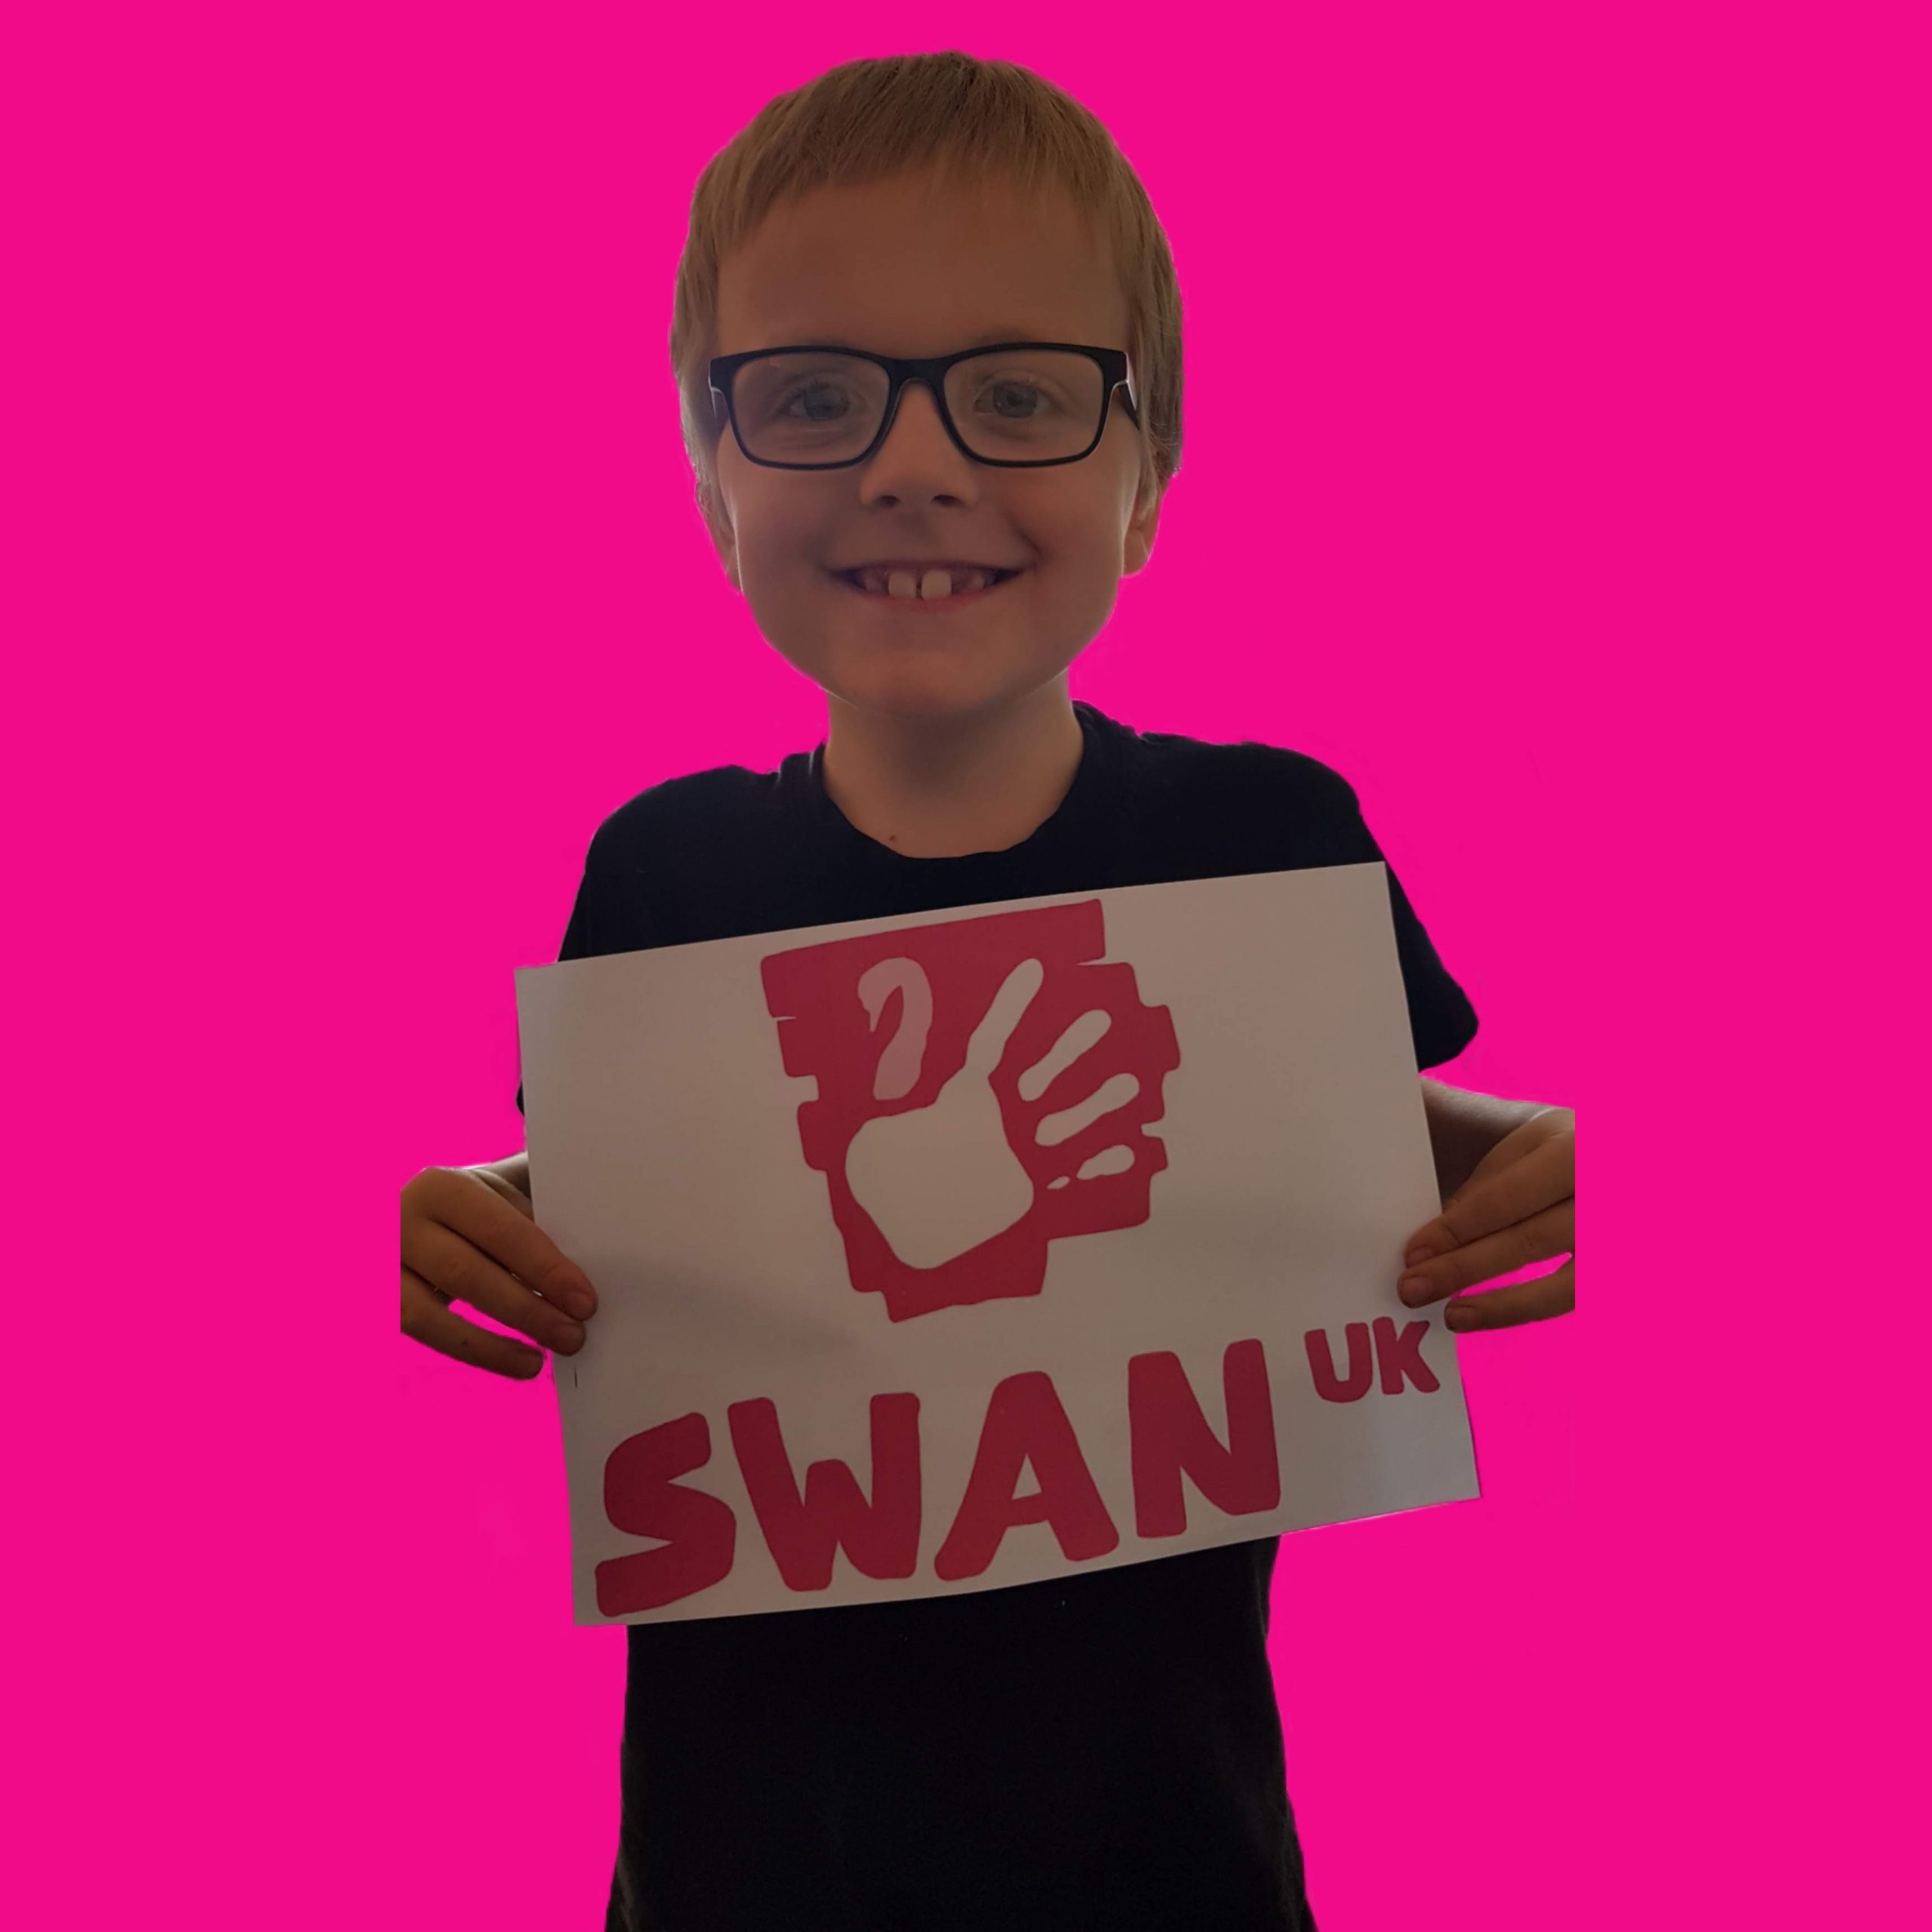 A young boy with glasses holds up a SWAN UK sign. He is cropped onto a bright pink background